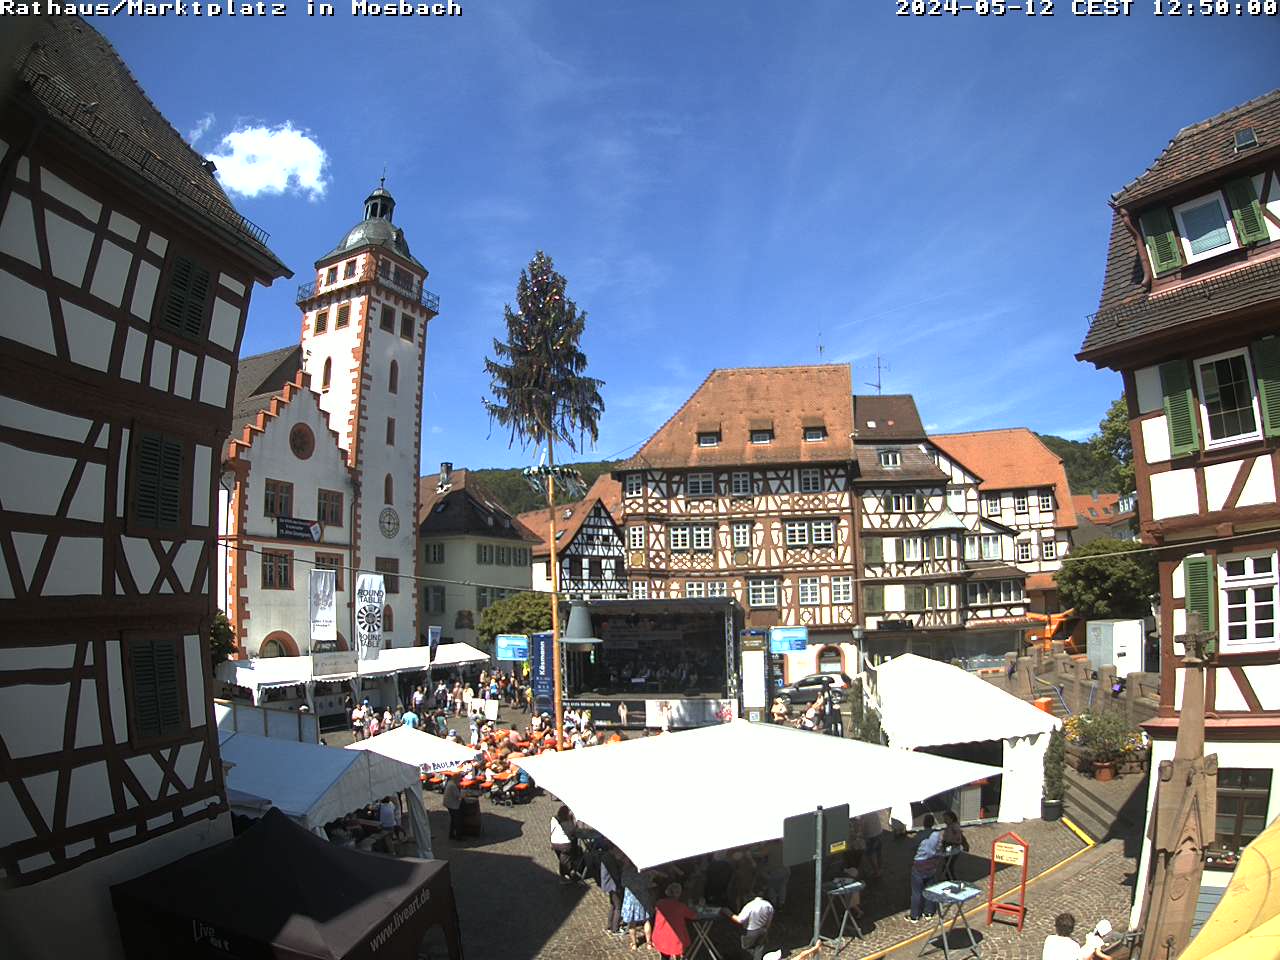 Mosbach Fre. 12:54